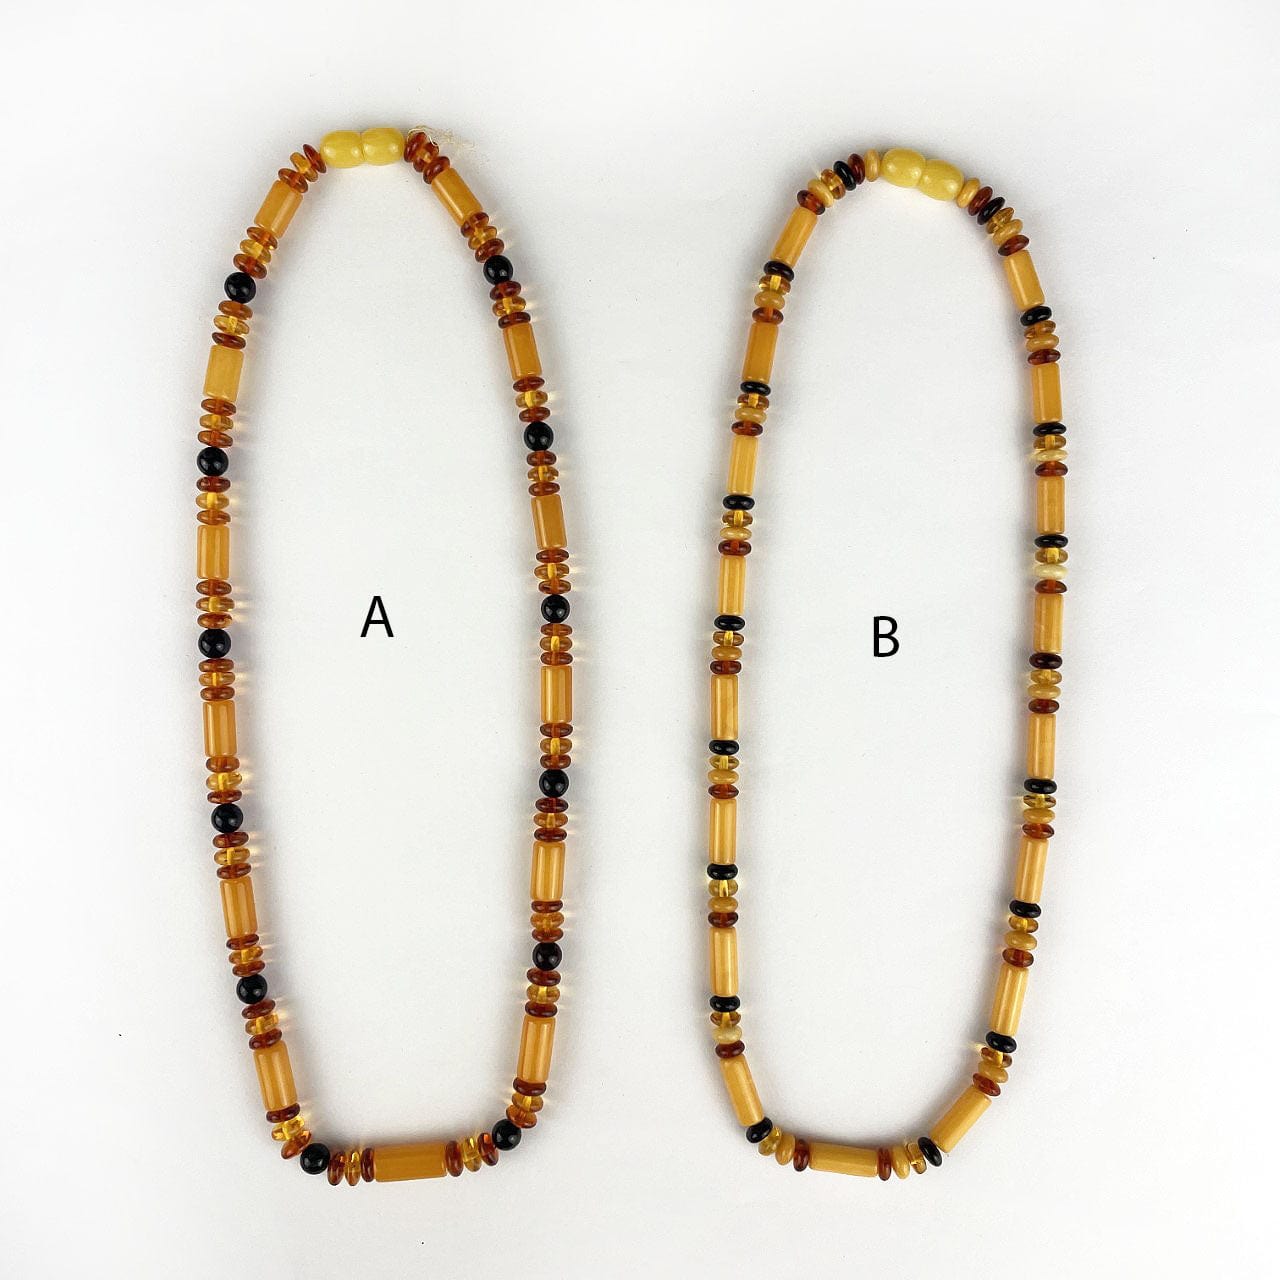 2 necklaces side by side with call out of A or B style